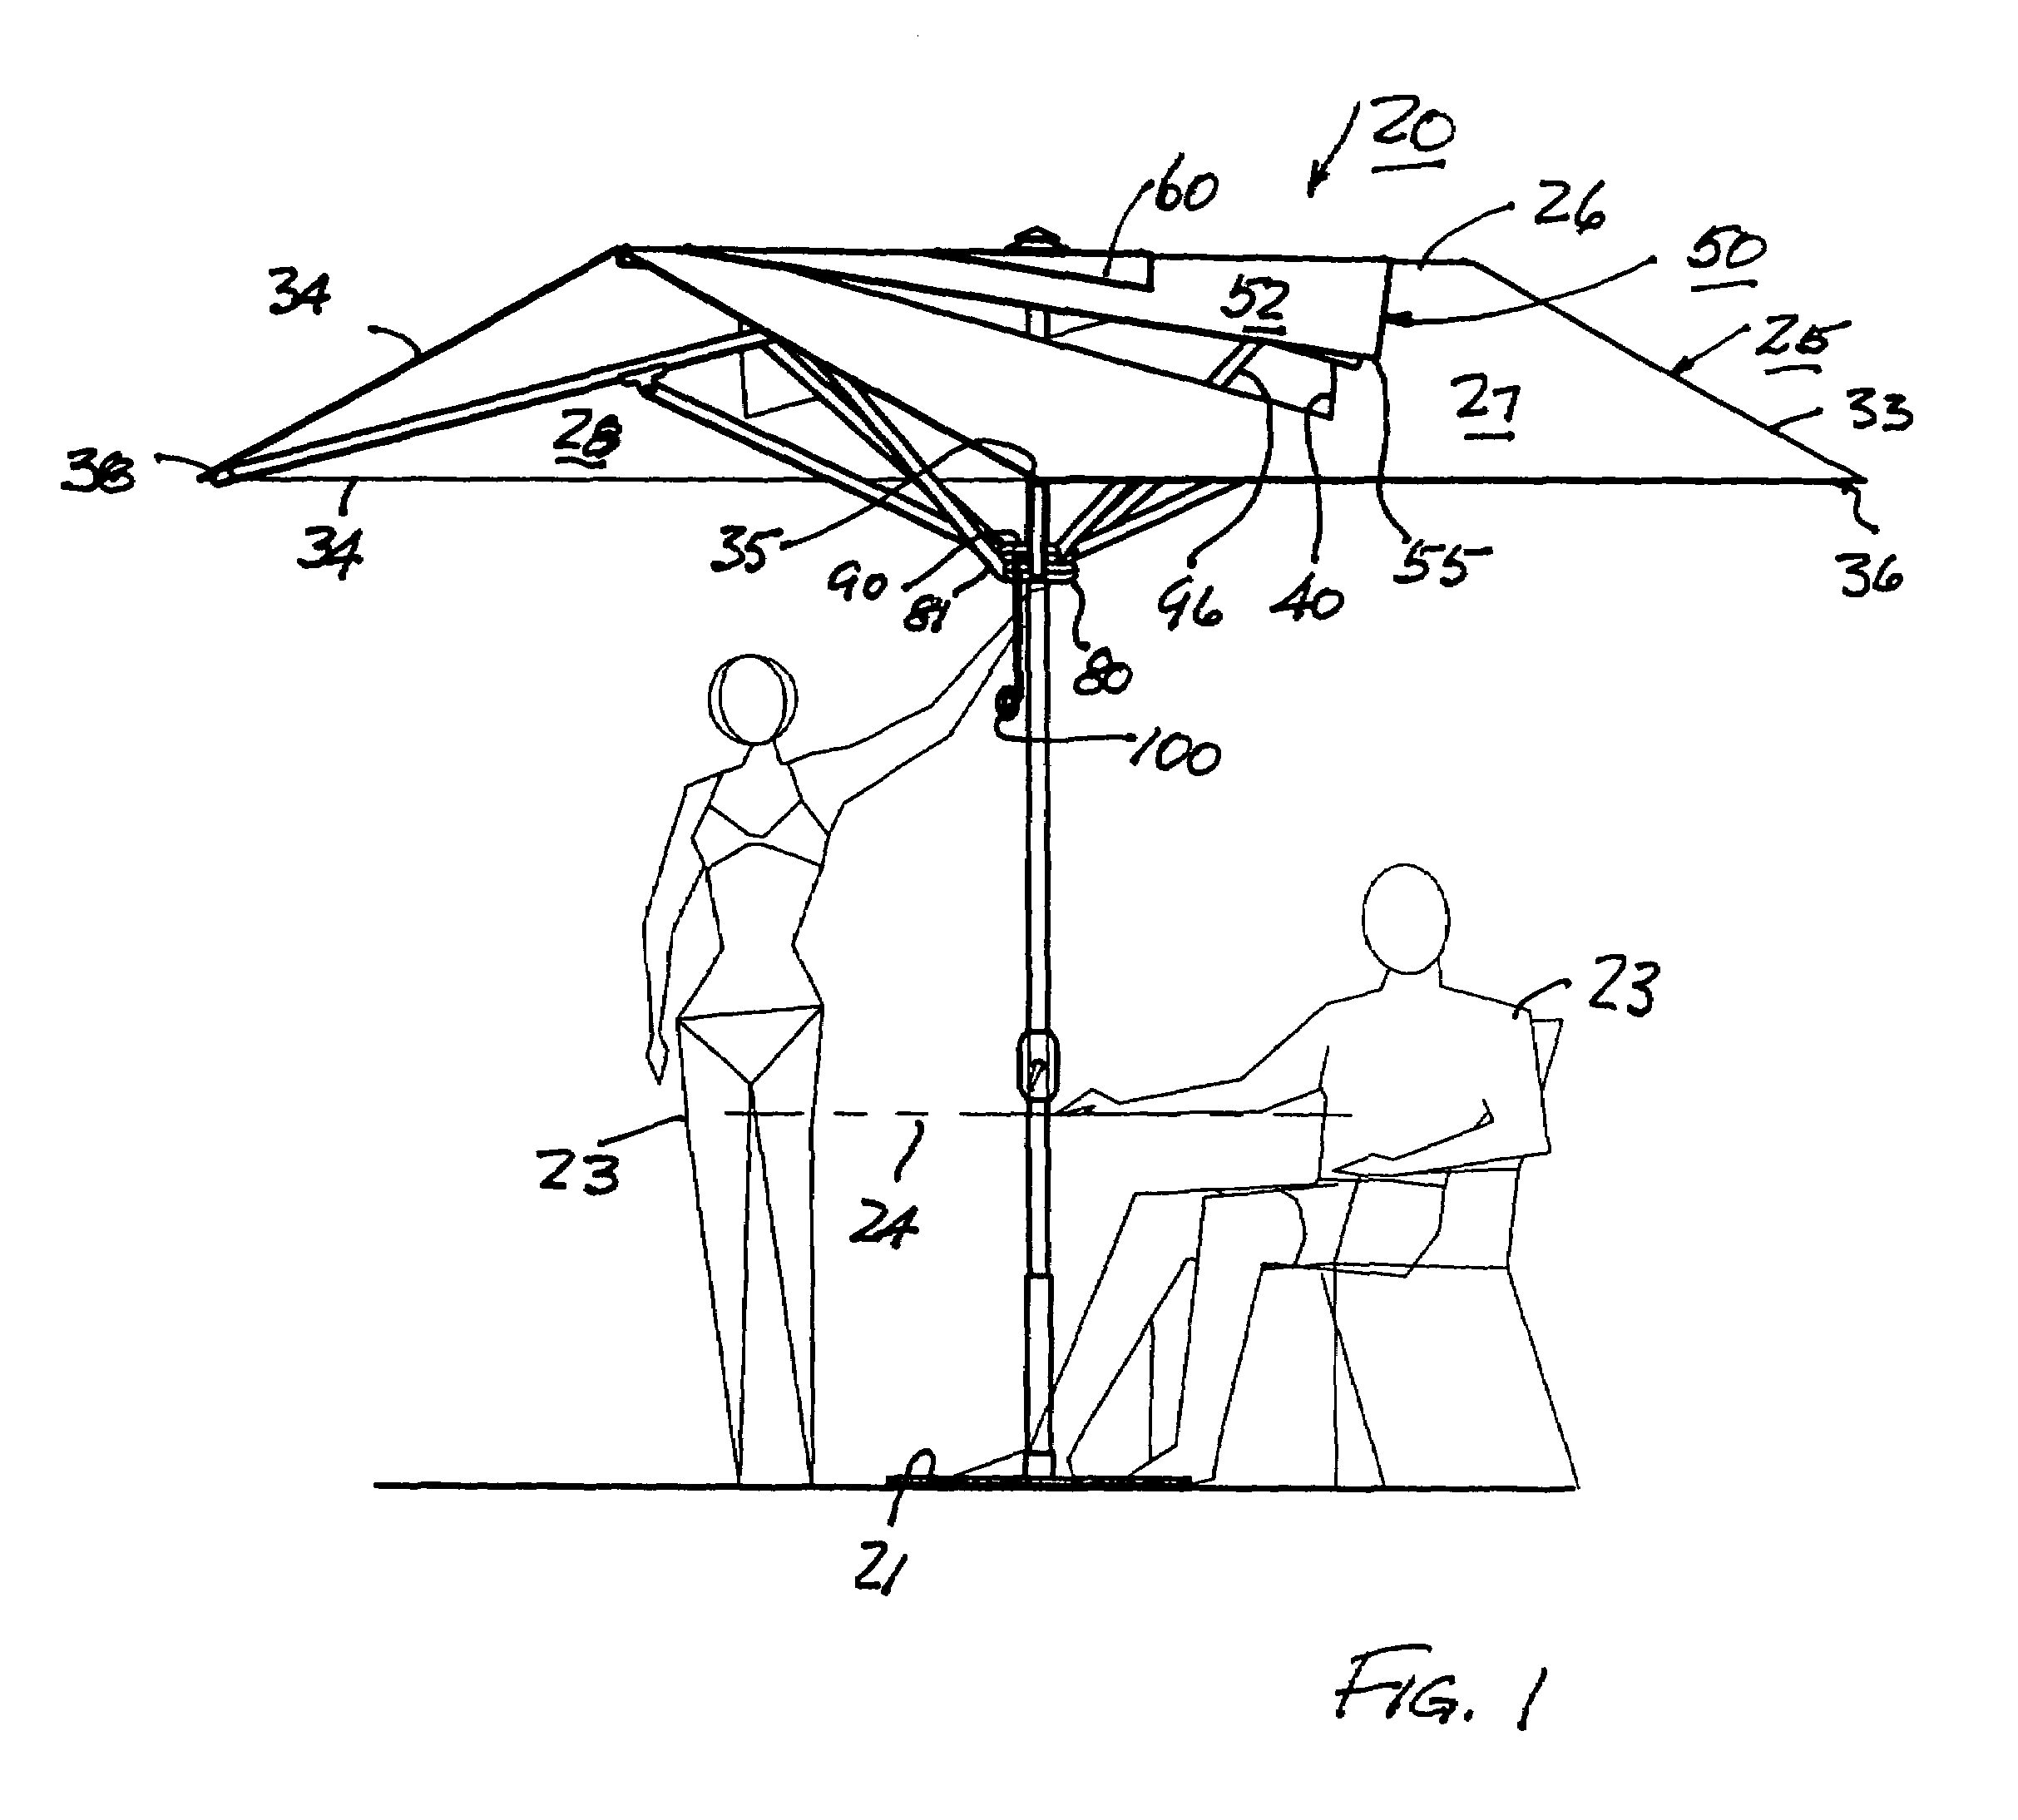 Umbrella with a vented canopy deployable and retractible to a dihedral shape with a positively moved canopy and vent cover